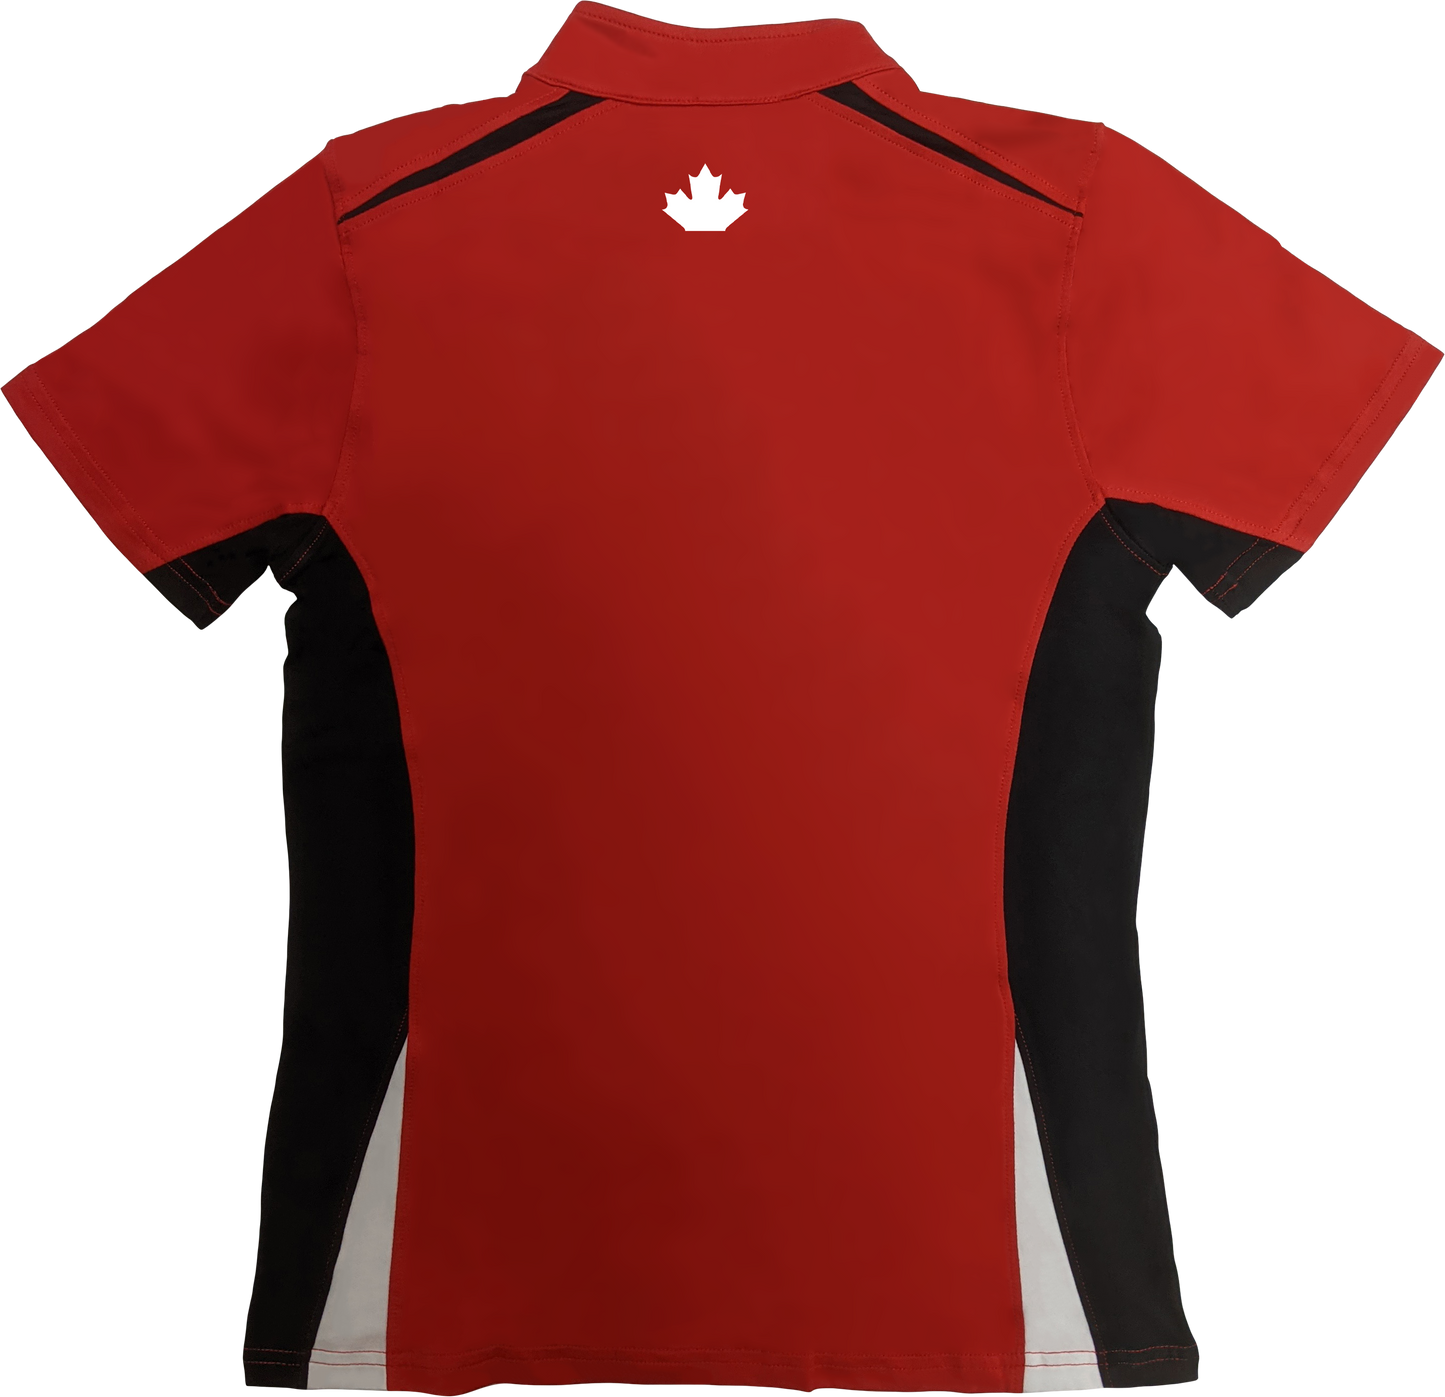 Load image into Gallery viewer, GoodLife Fitness Ladies All Associate Zip Polo
